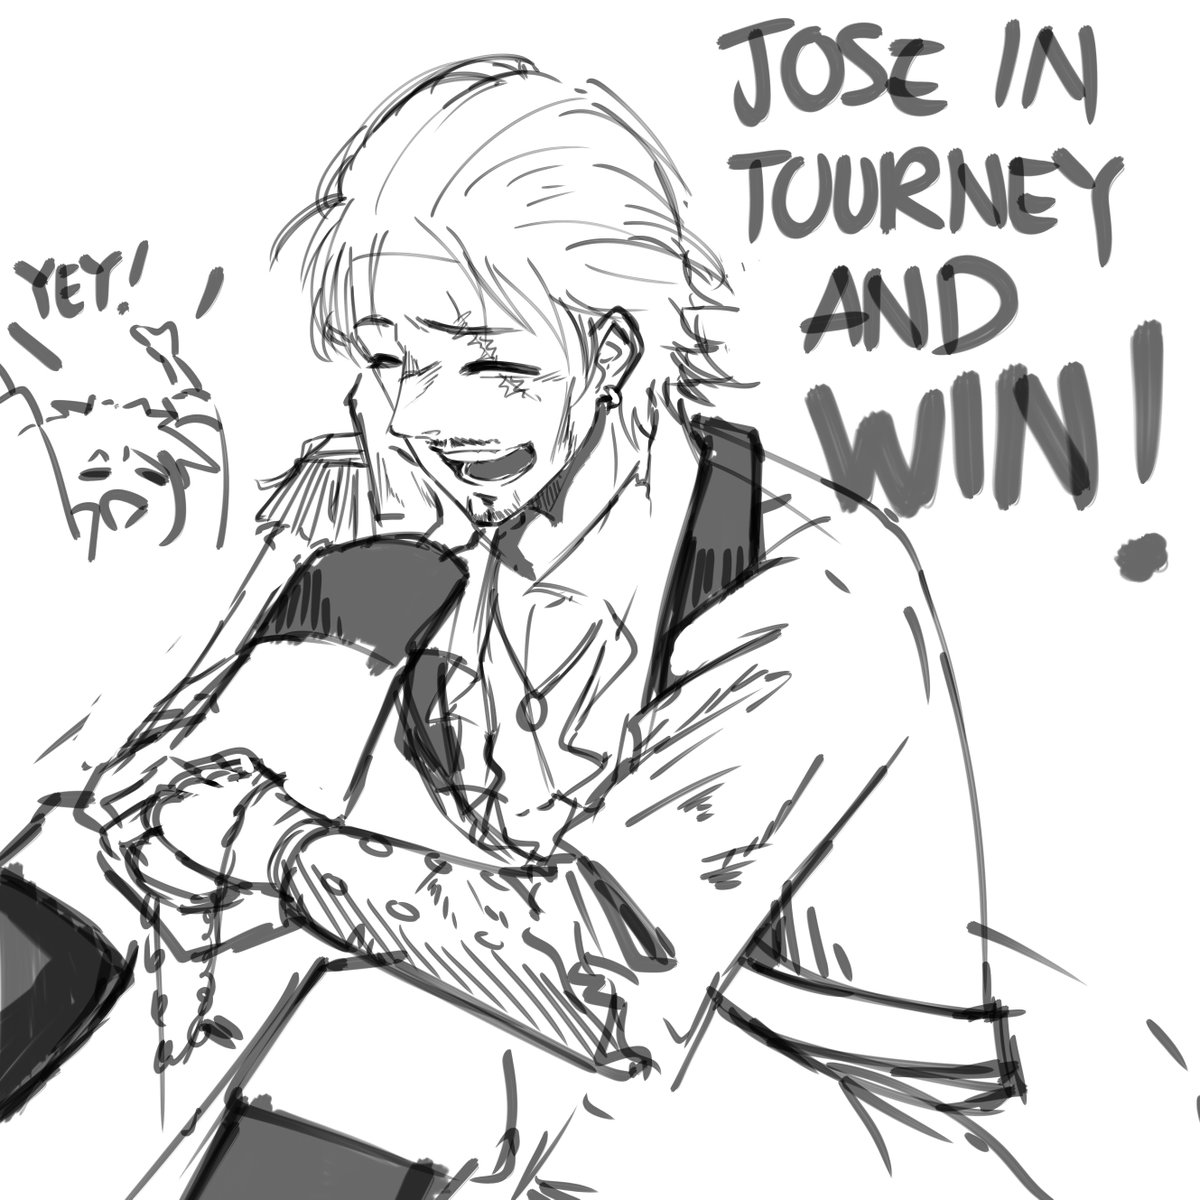 QUICK DOODLE OF JOSE BADEN COZ HE DESERVES THE WHOLE WORLD AND SEA 